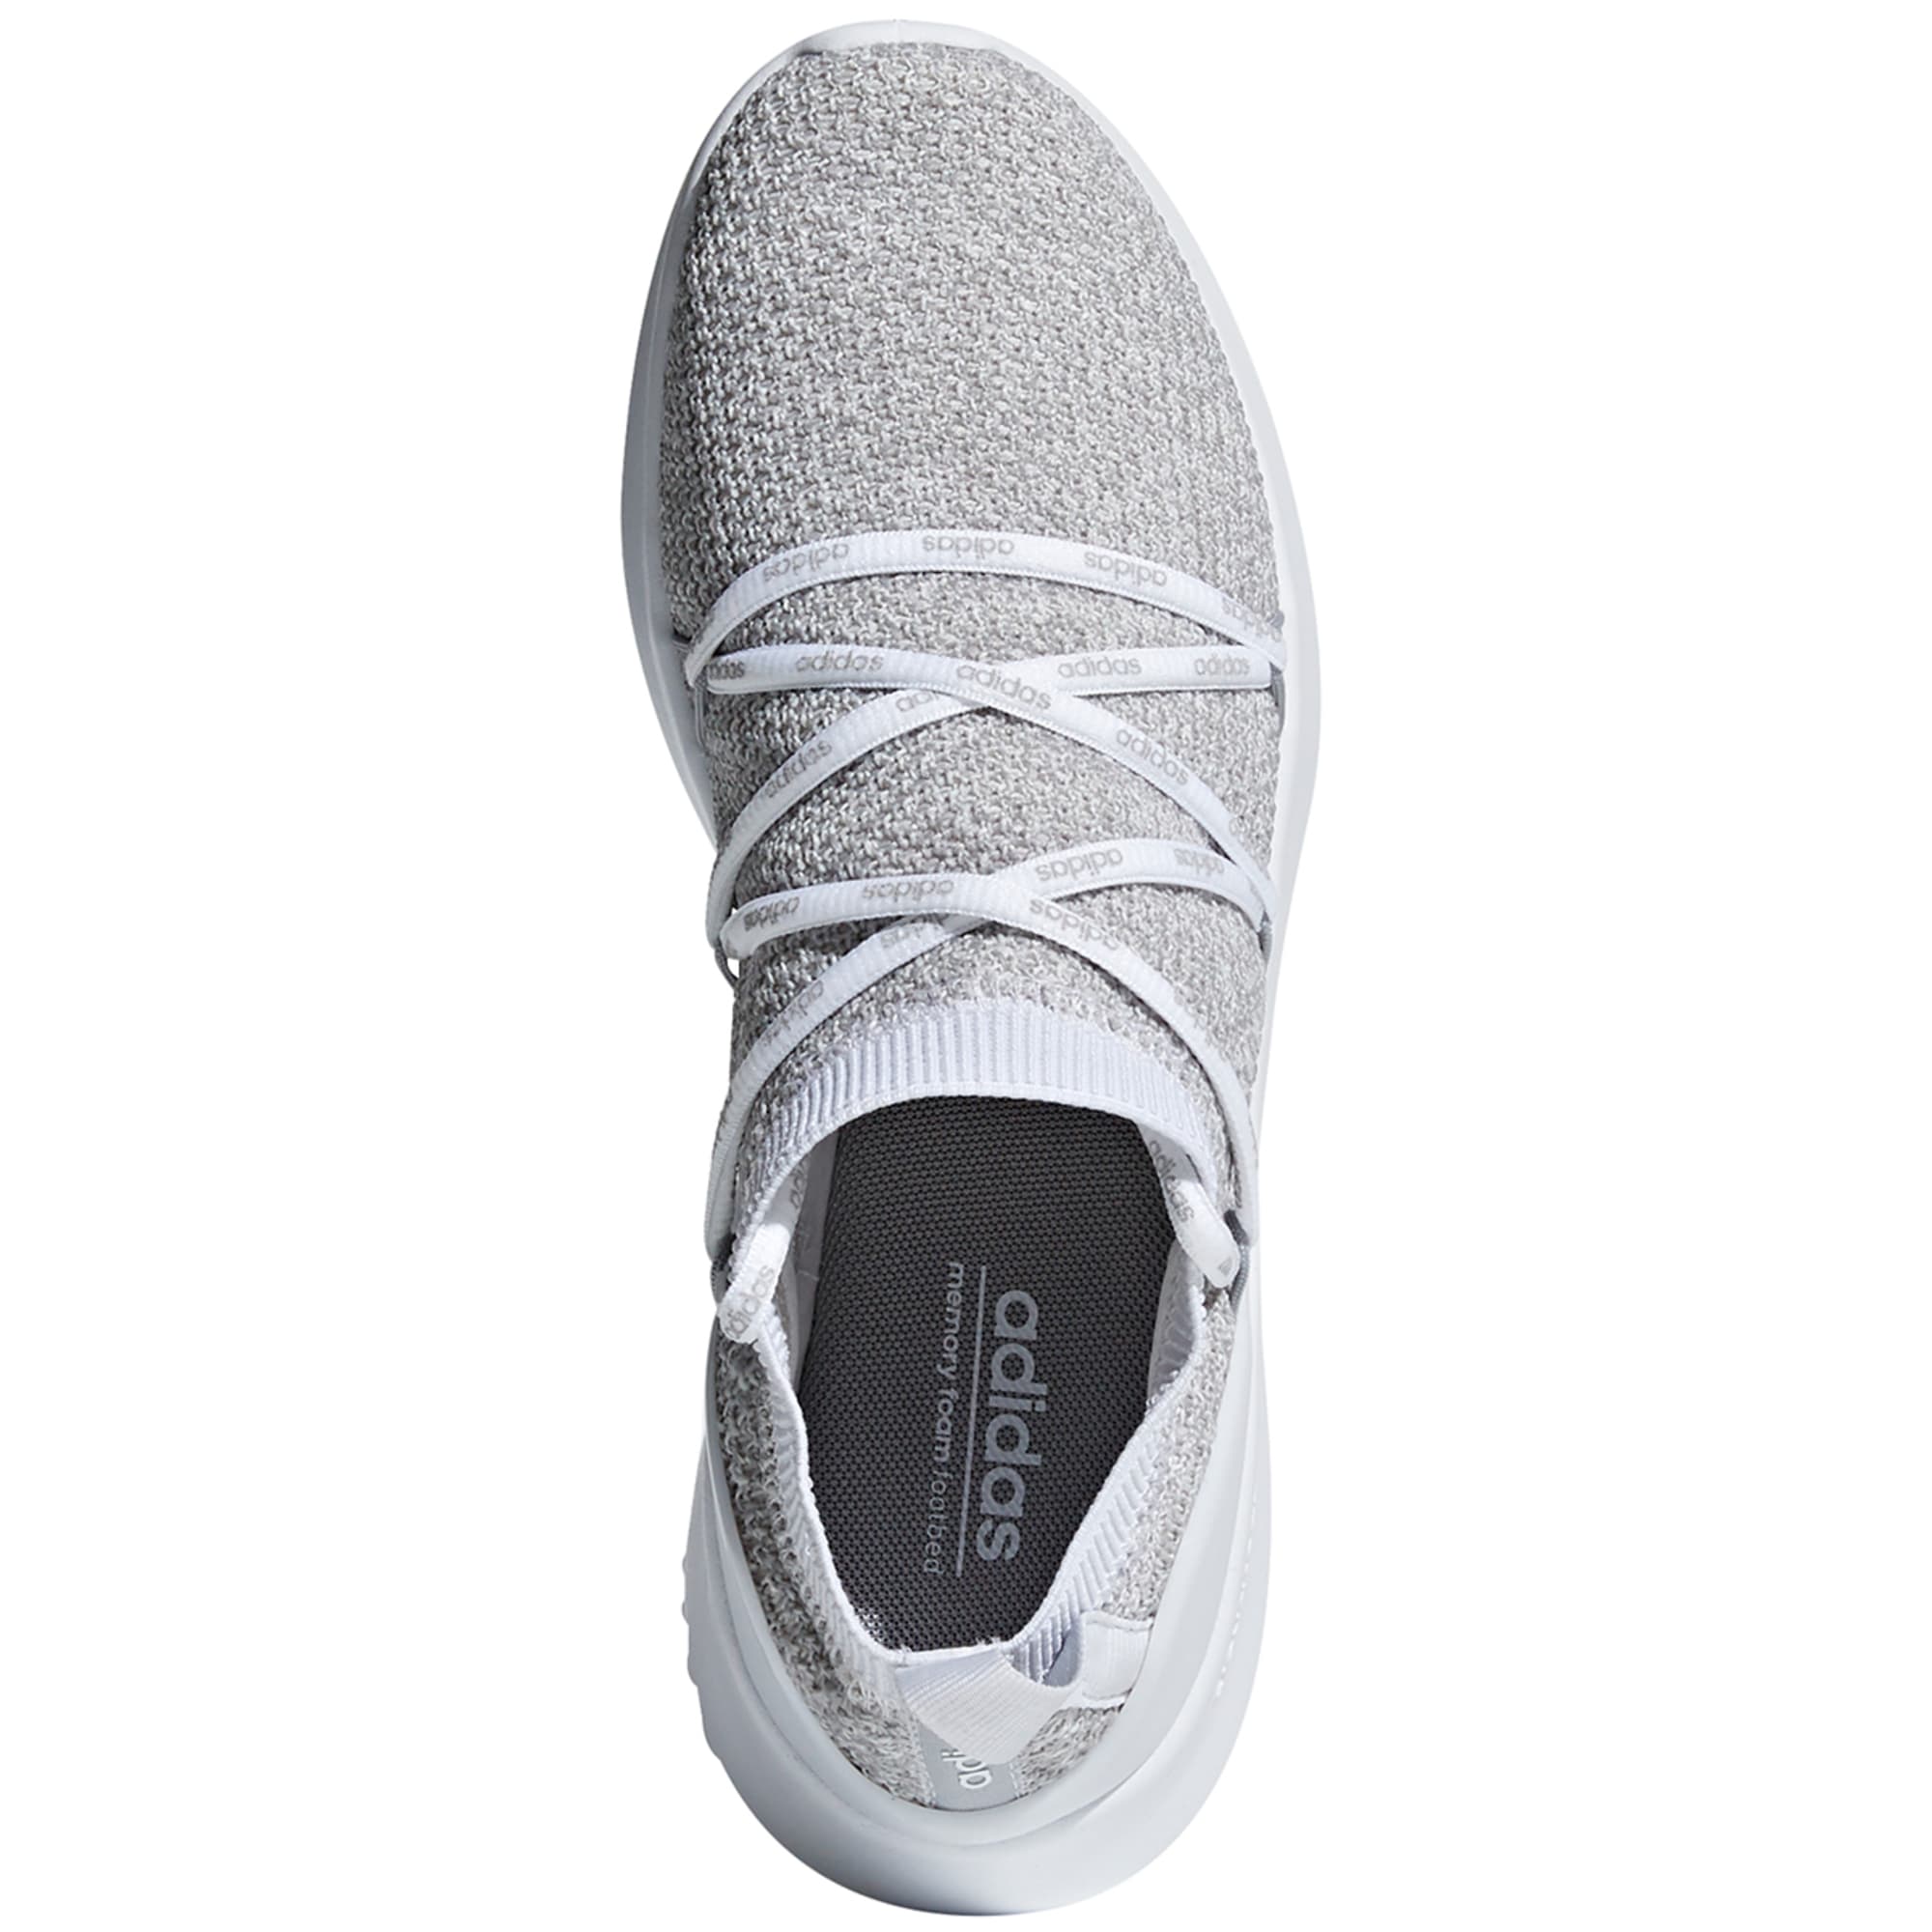 adidas women's ultimamotion shoes